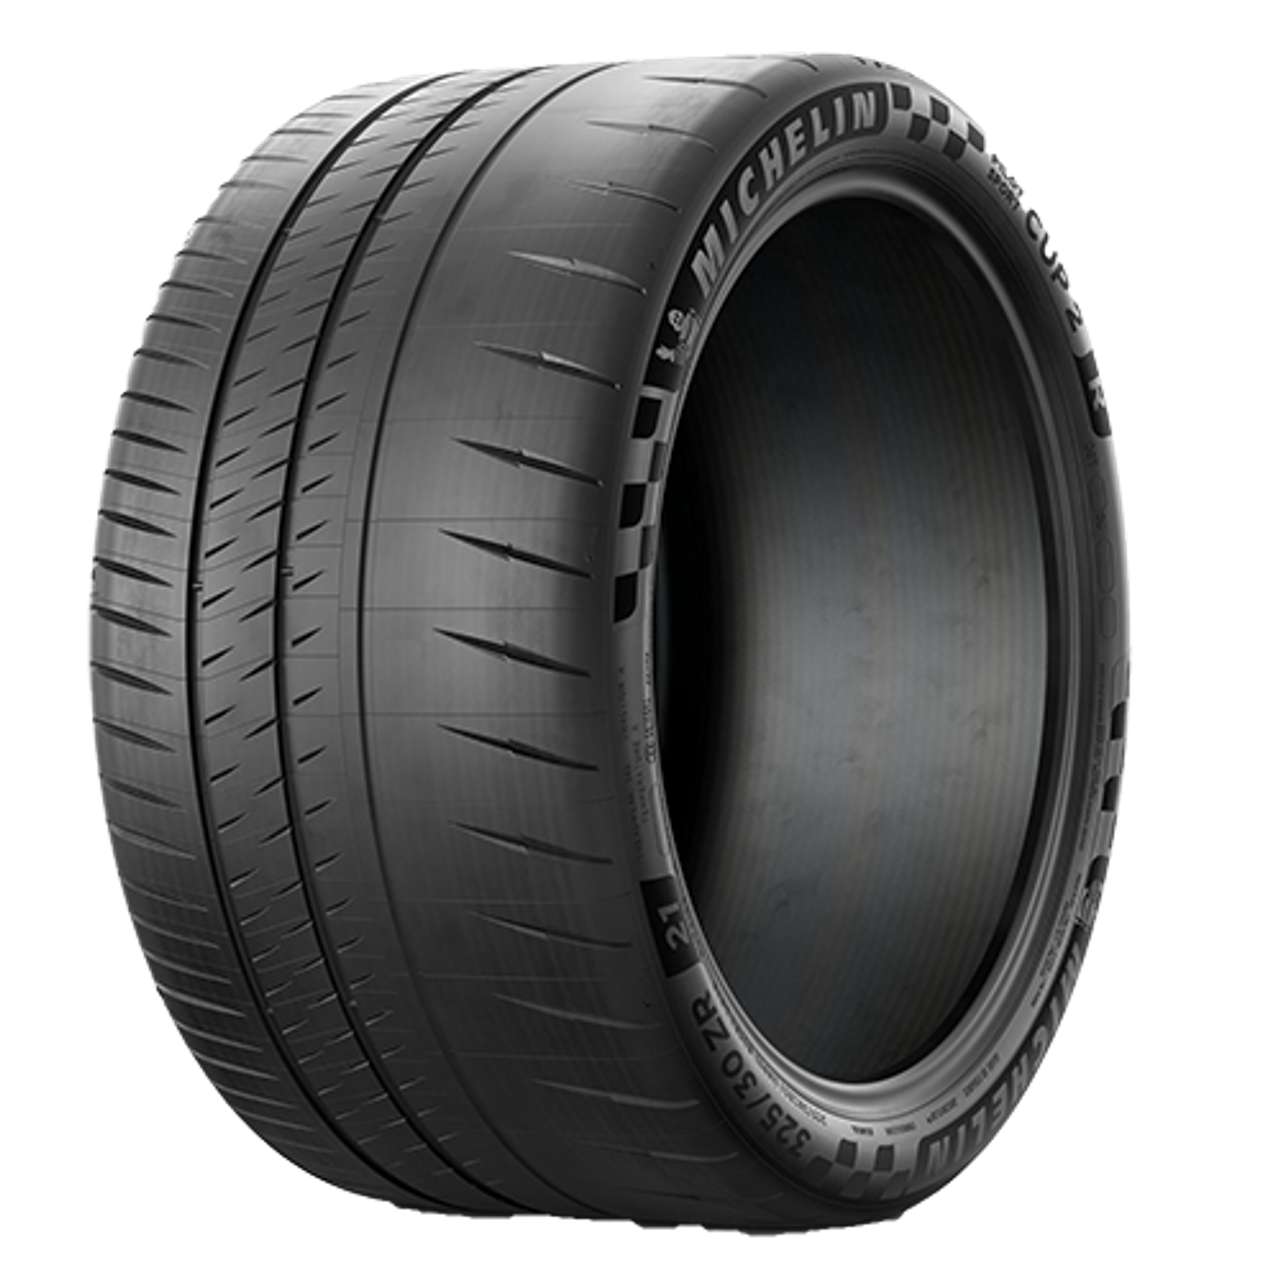 MICHELIN PILOT SPORT CUP 2 R CONNECT 295/30ZR20 101(Y) BSW XL